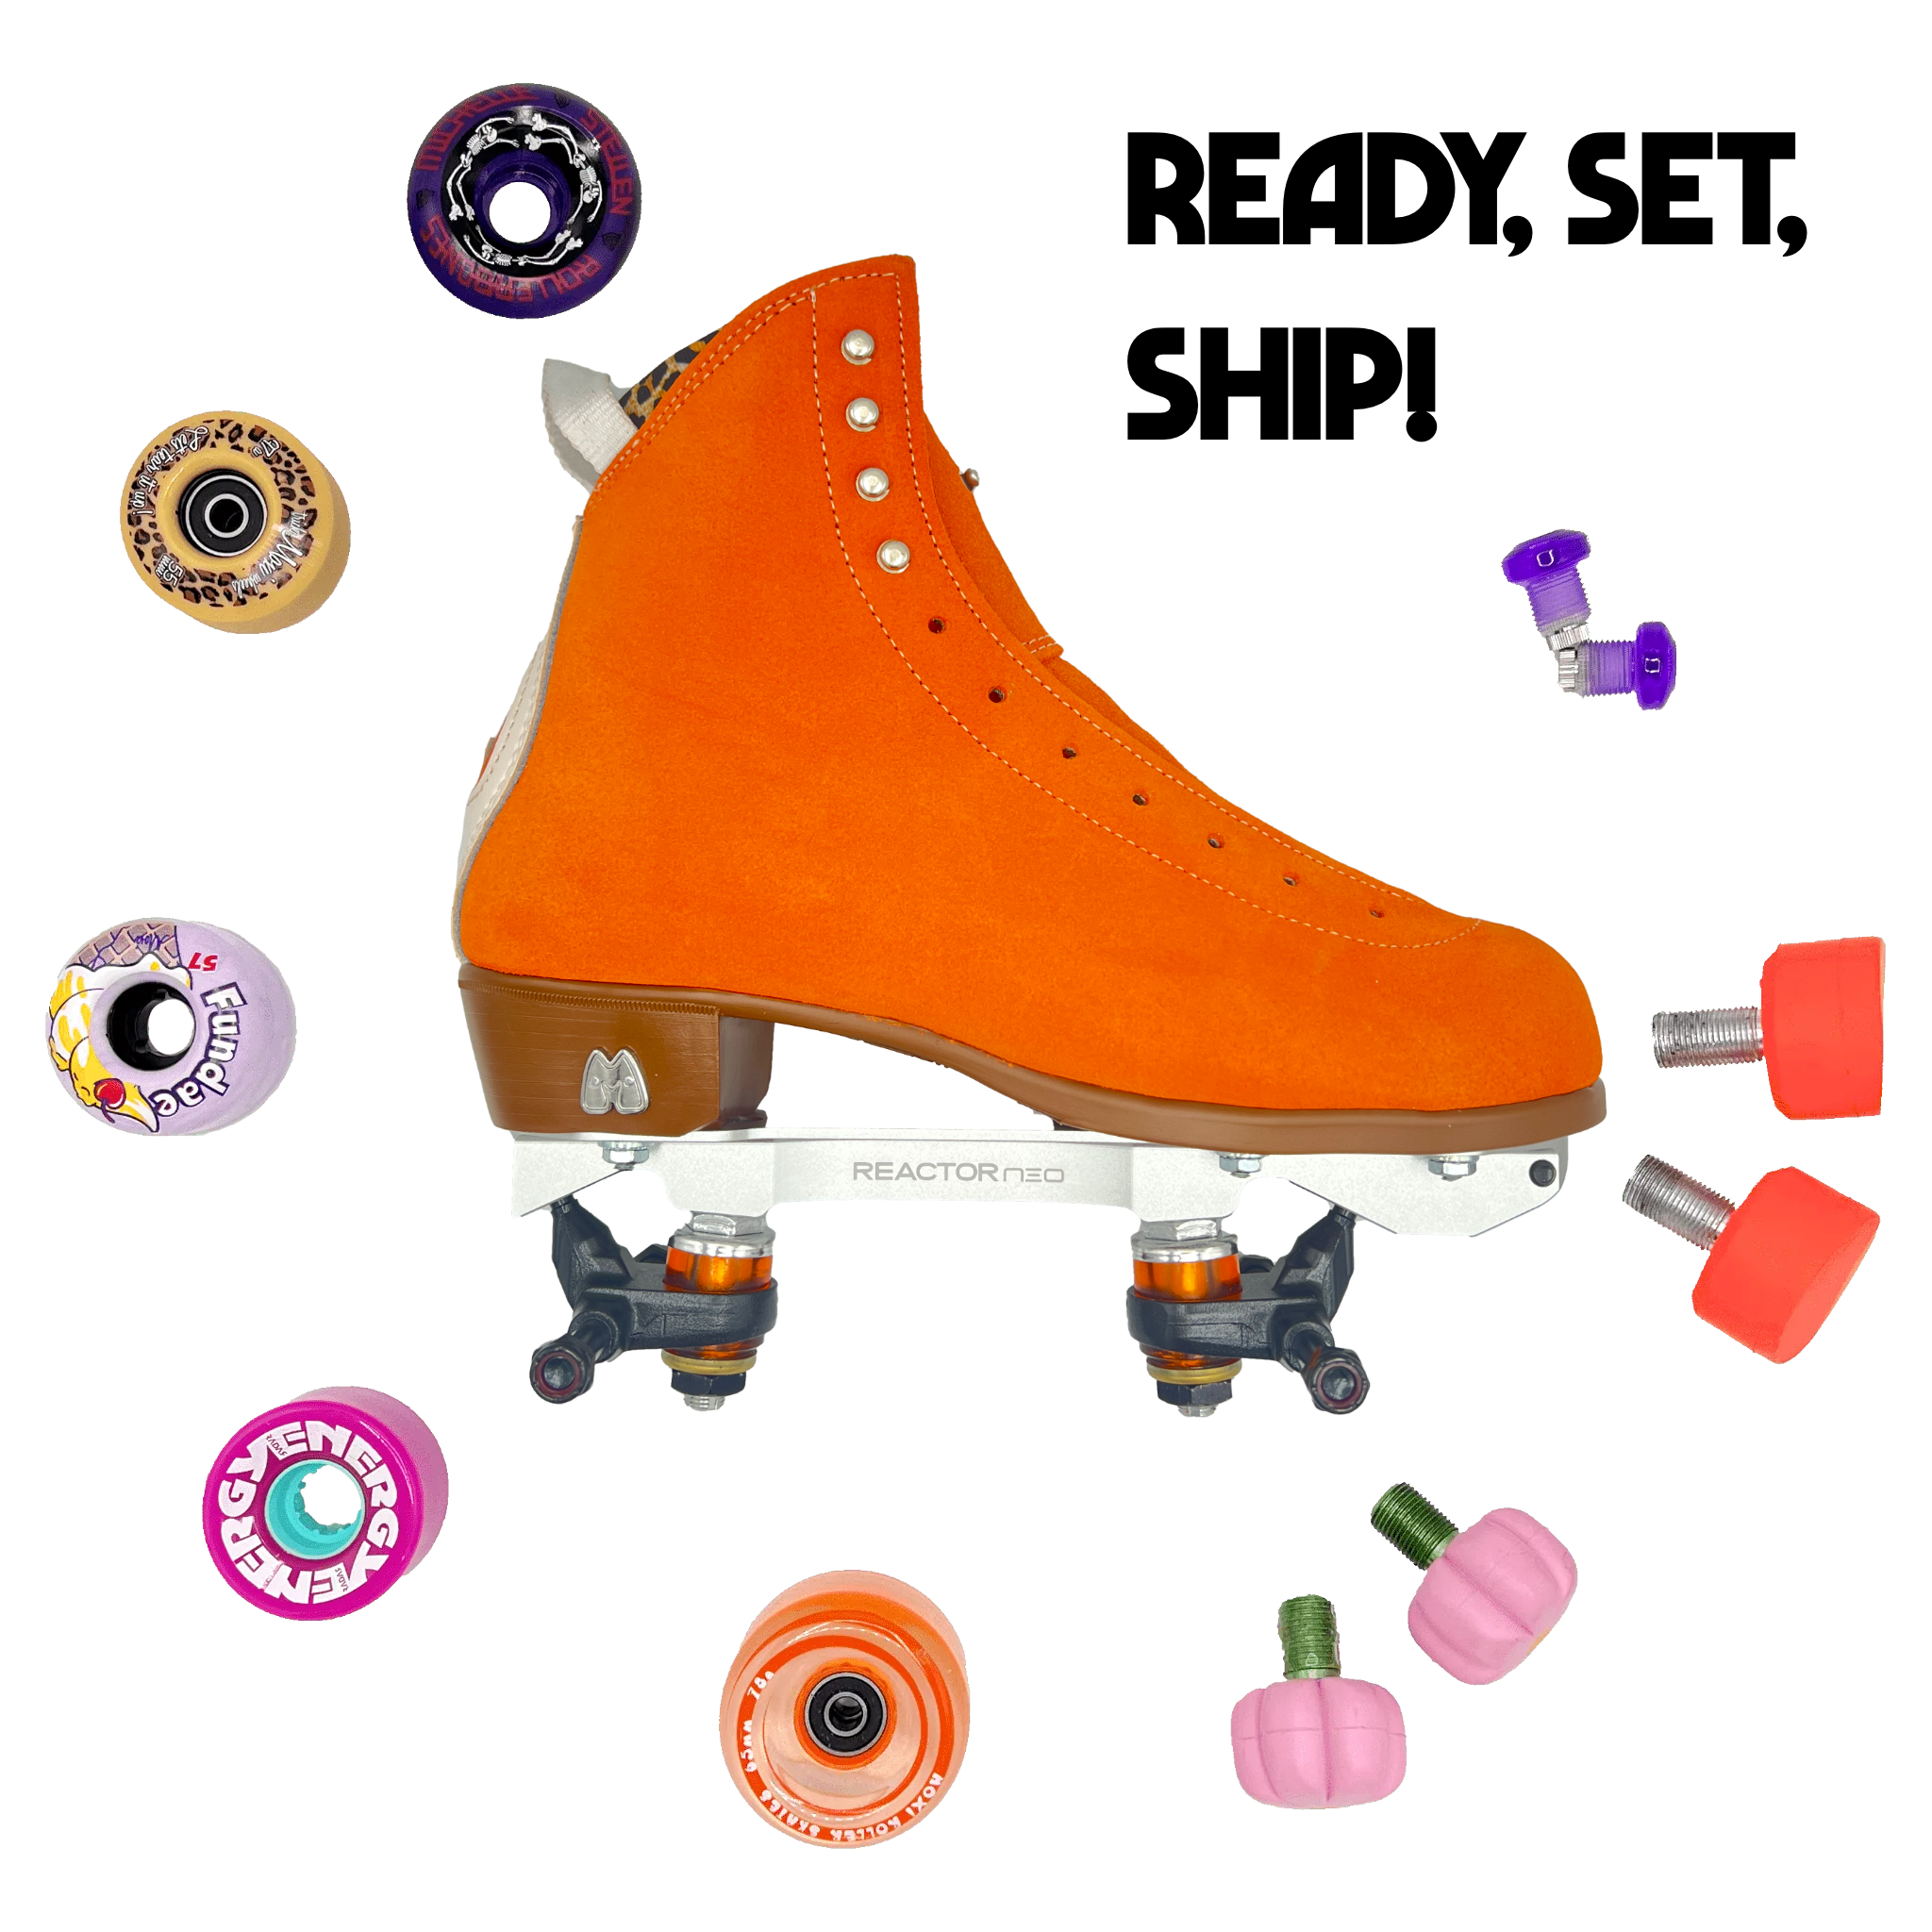 How to Choose your Kids' Roller Skates?